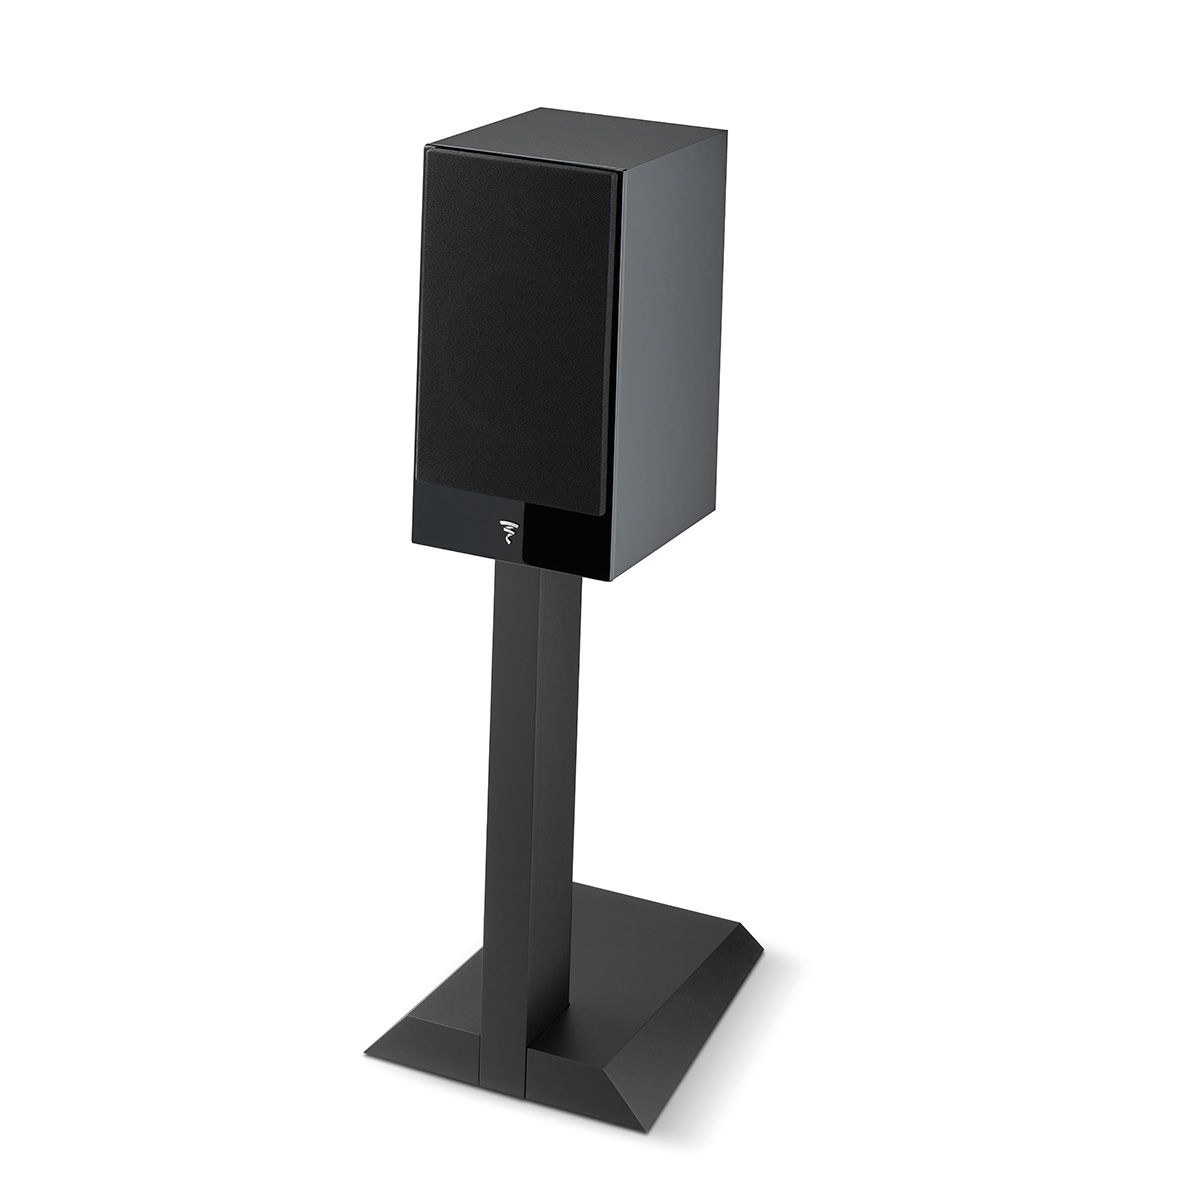 Focal Theva No1 Bookshelf Speakers - Pair - angled right front view on stand with grille